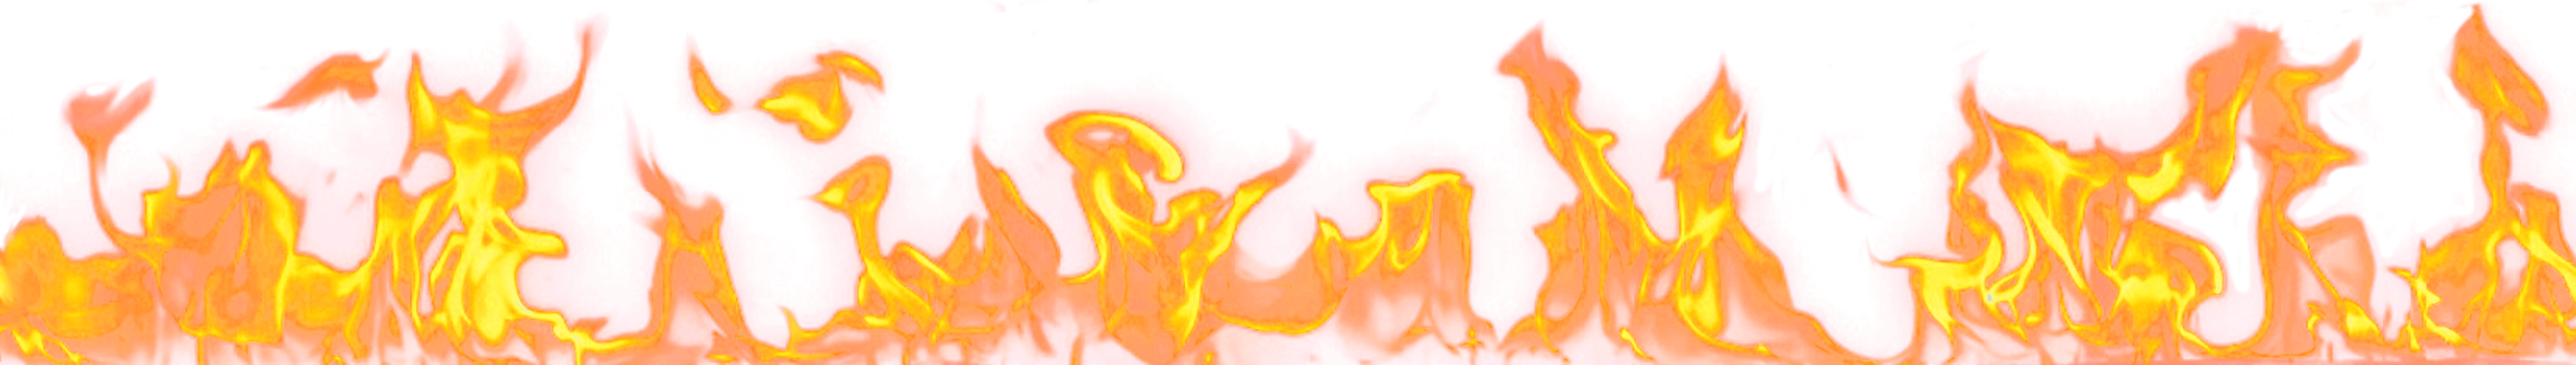 Download FIRE FLAMES Free PNG transparent image and clipart